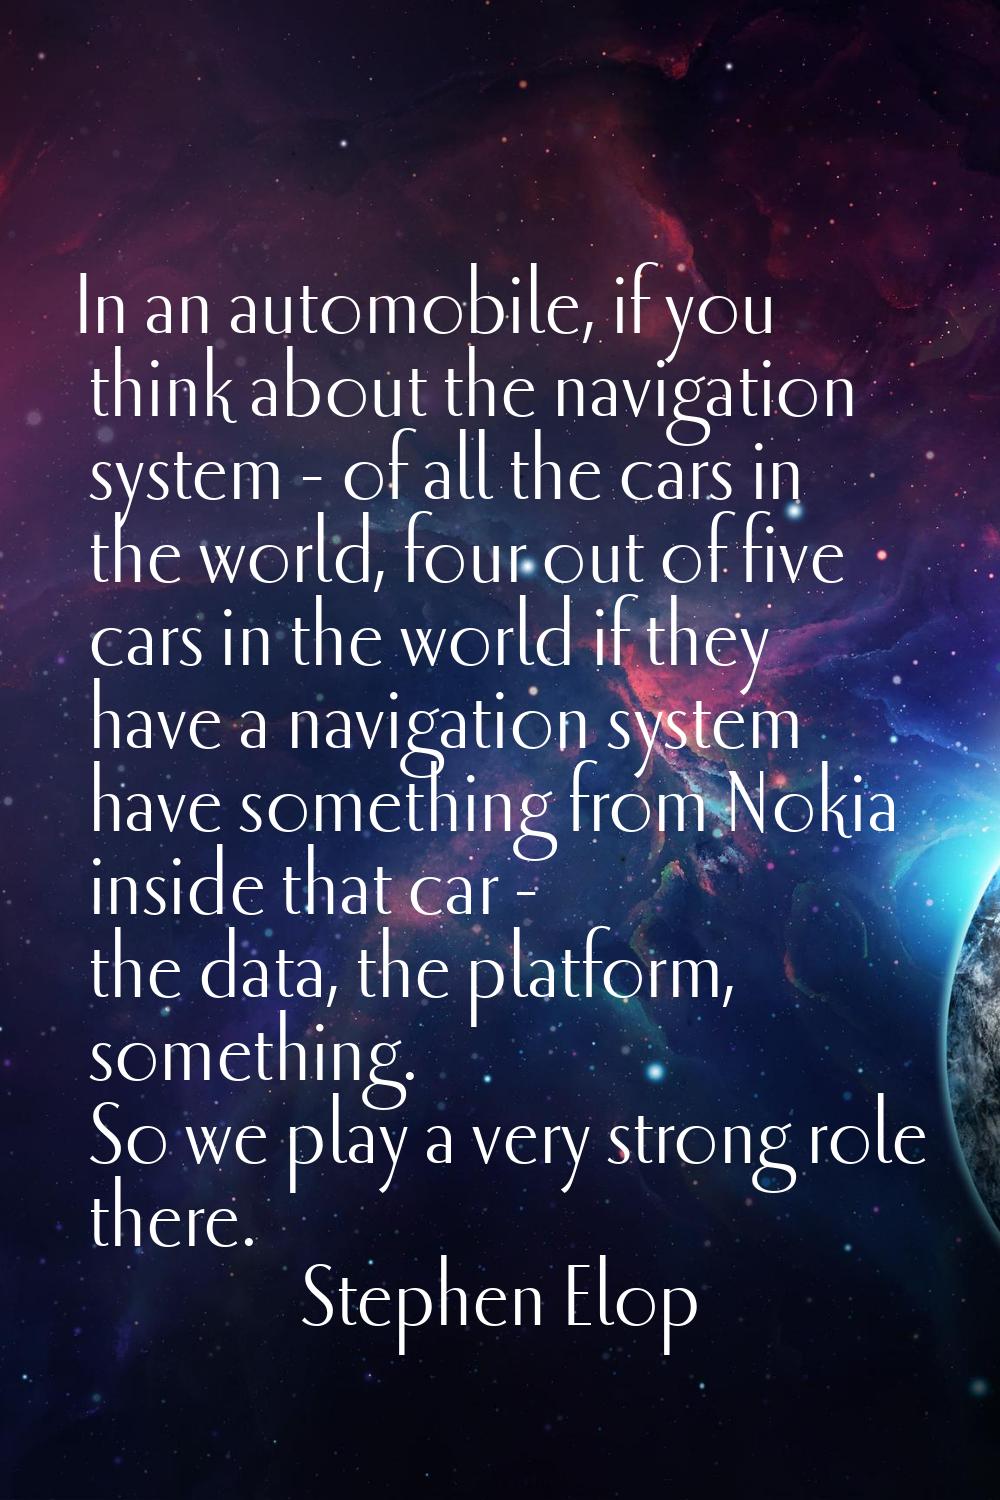 In an automobile, if you think about the navigation system - of all the cars in the world, four out